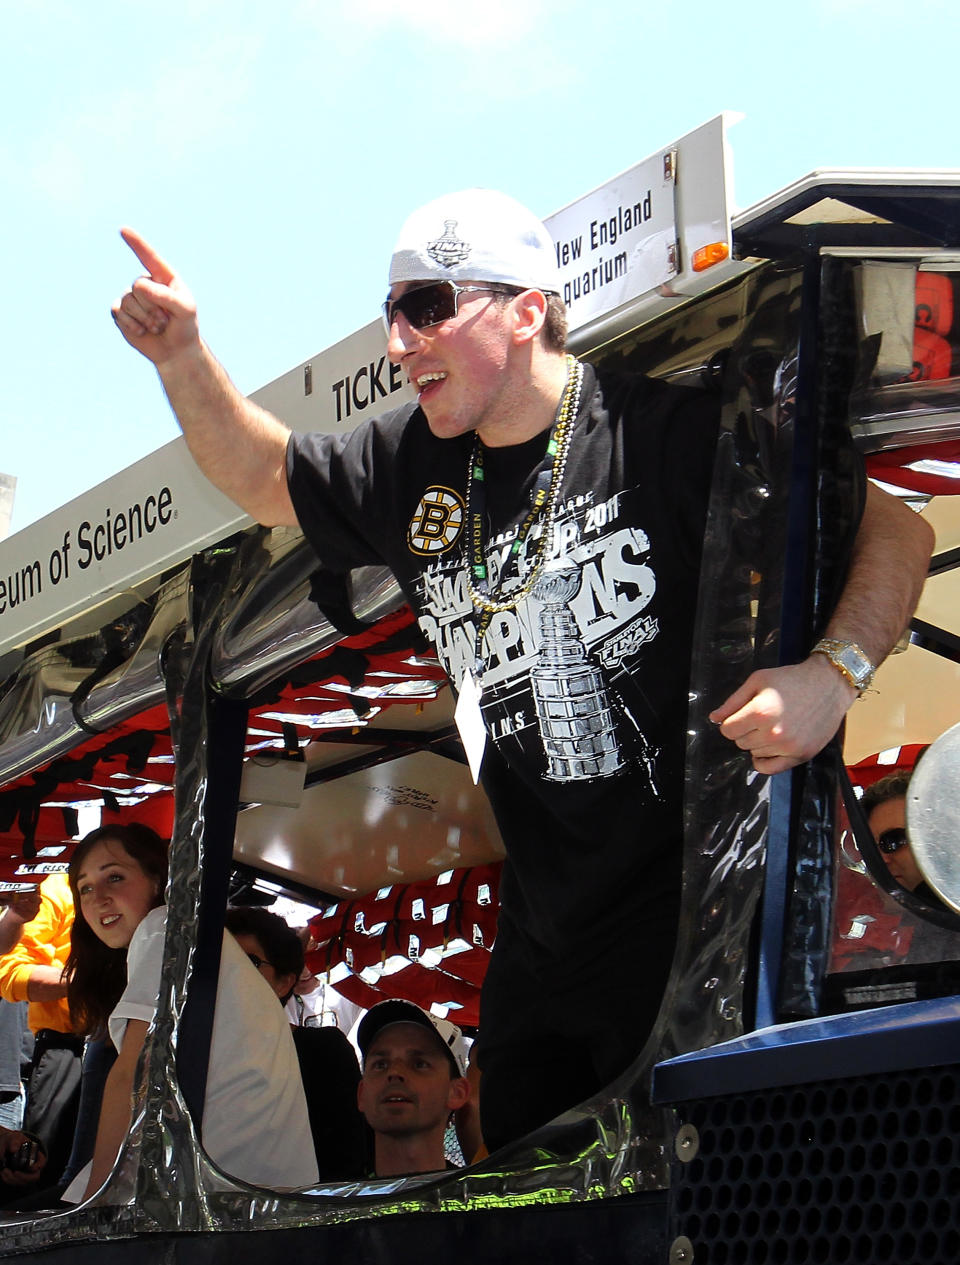 BOSTON, MA - JUNE 18: Brad Marchand of the Boston Bruins reacts to cheers during a Stanley Cup victory parade on June 18, 2011 in Boston, Massachusetts. (Photo by Jim Rogash/Getty Images)